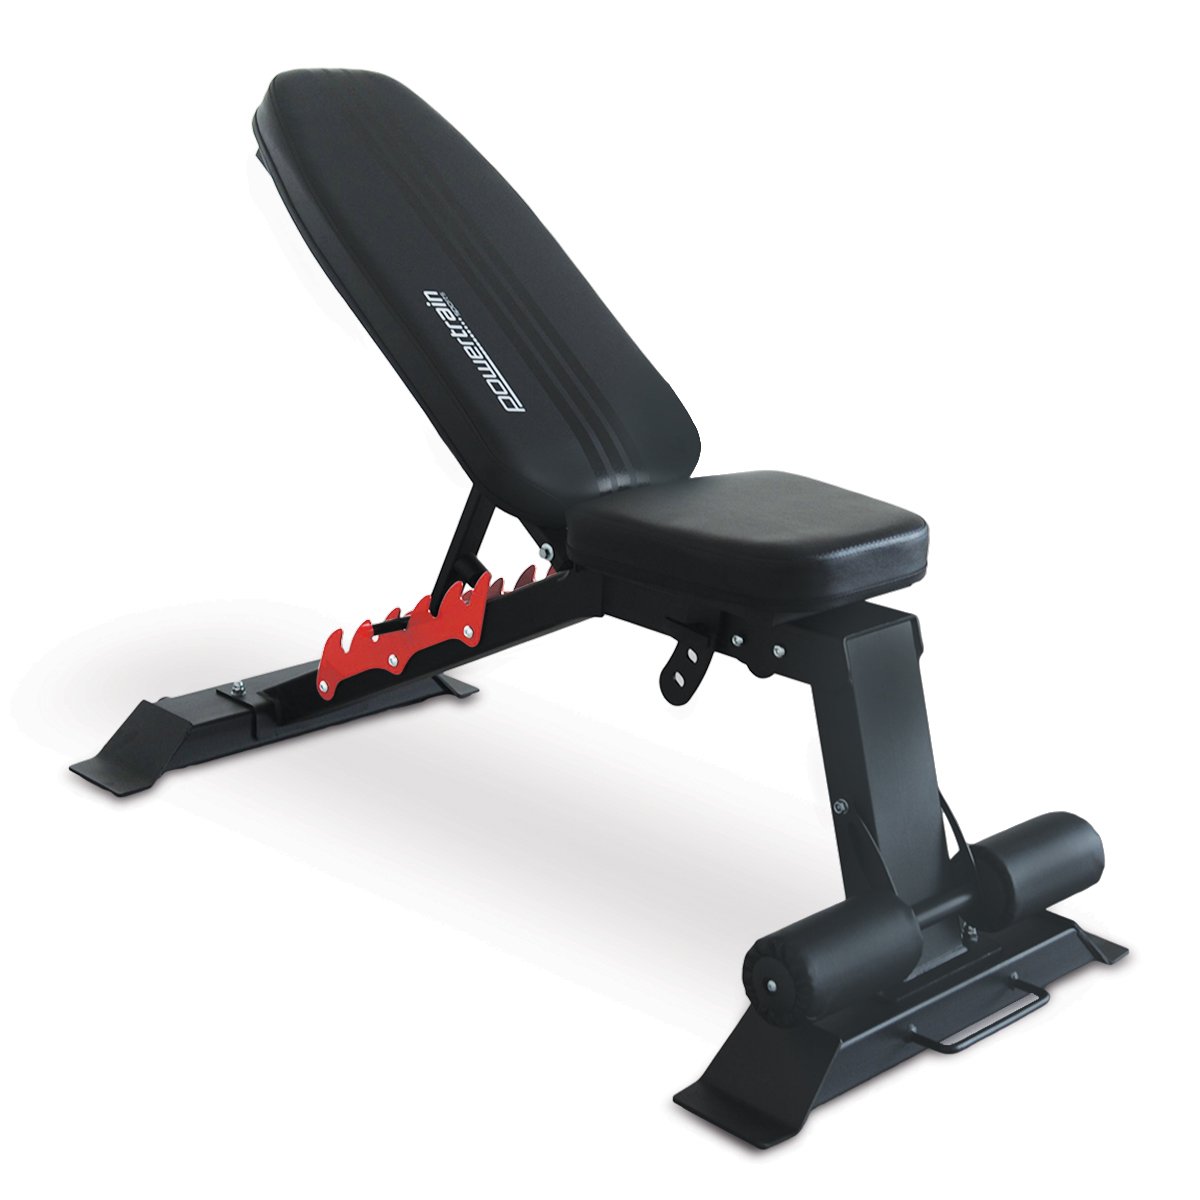 Powertrain Home Gym Adjustable Dumbbell Bench - SILBERSHELL